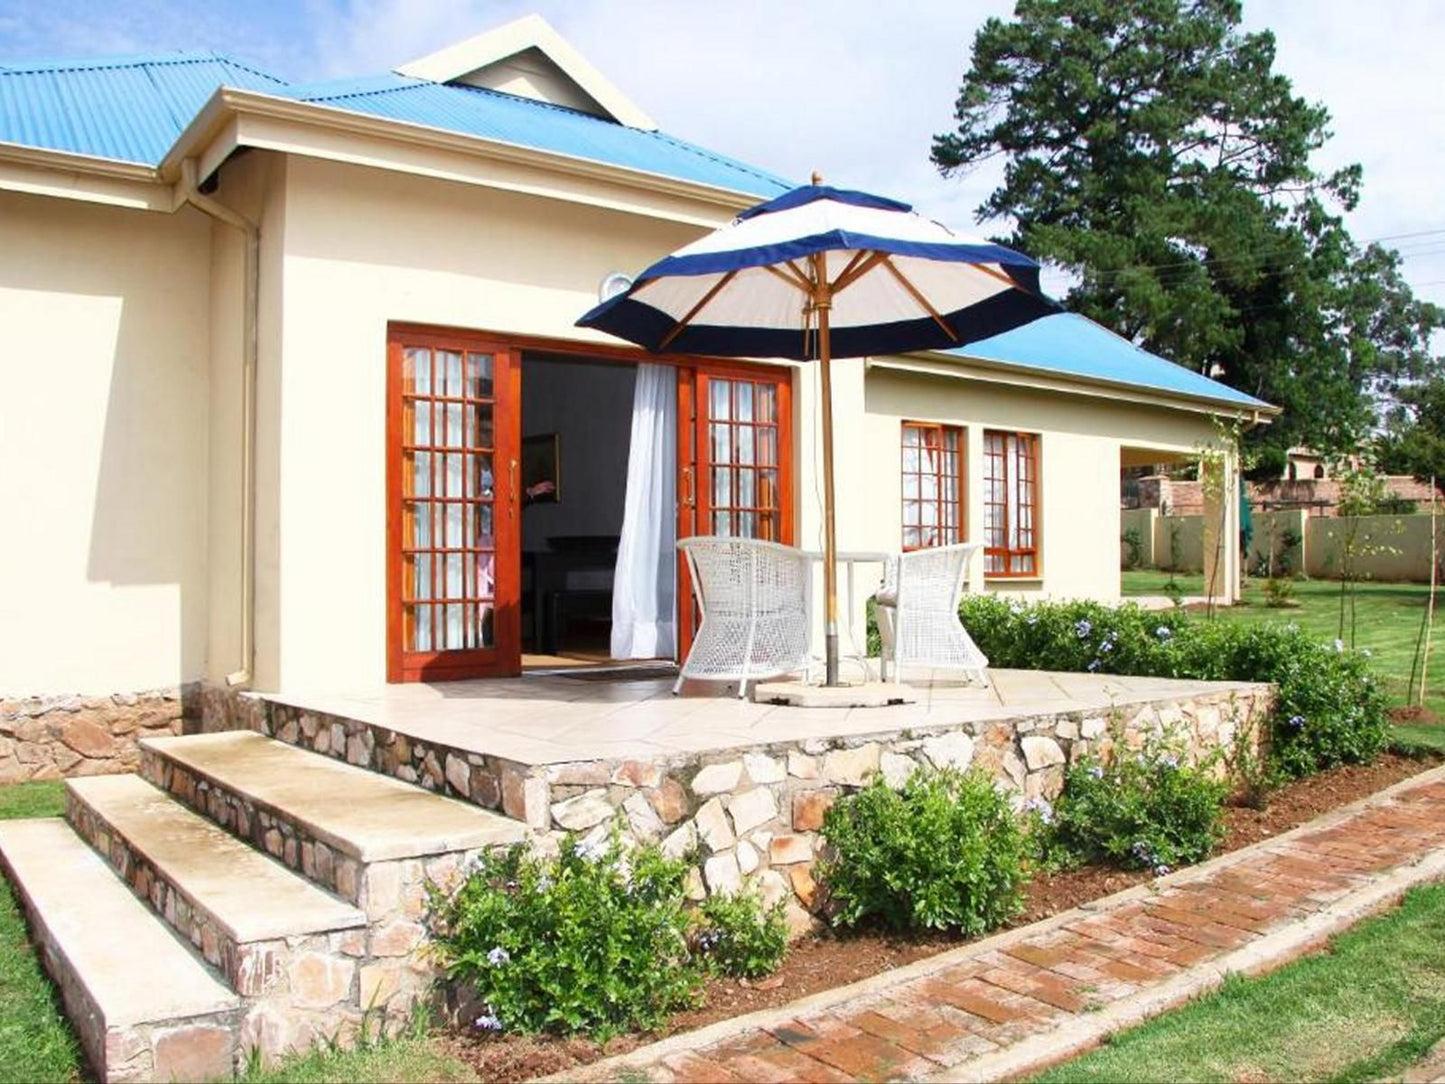 The Rose Cottage Bandb Dullstroom Mpumalanga South Africa House, Building, Architecture